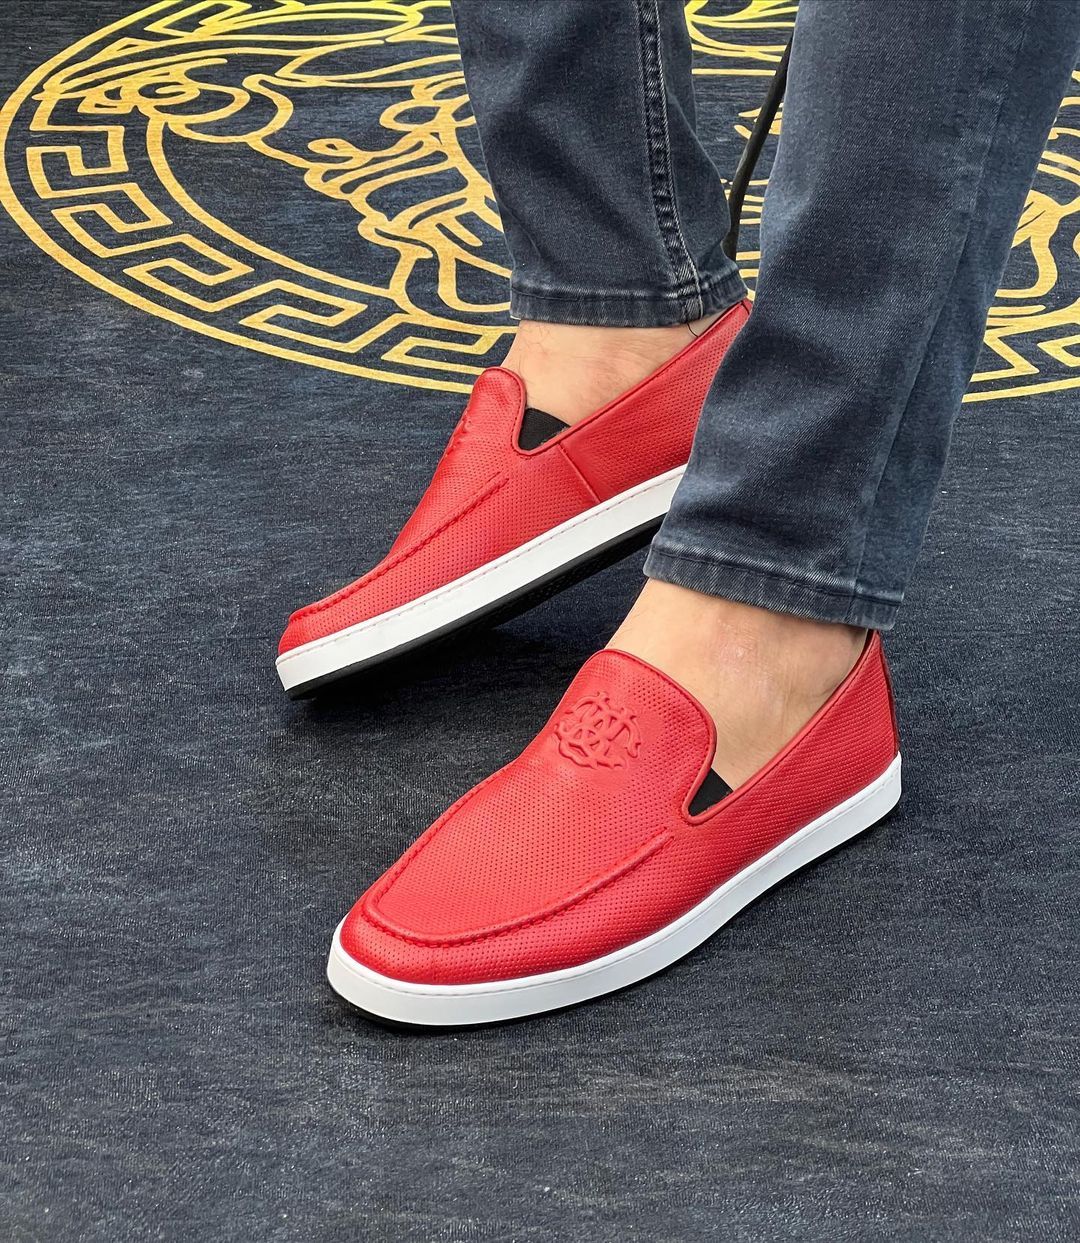 Men's Retro Leather Comfortable Loafer